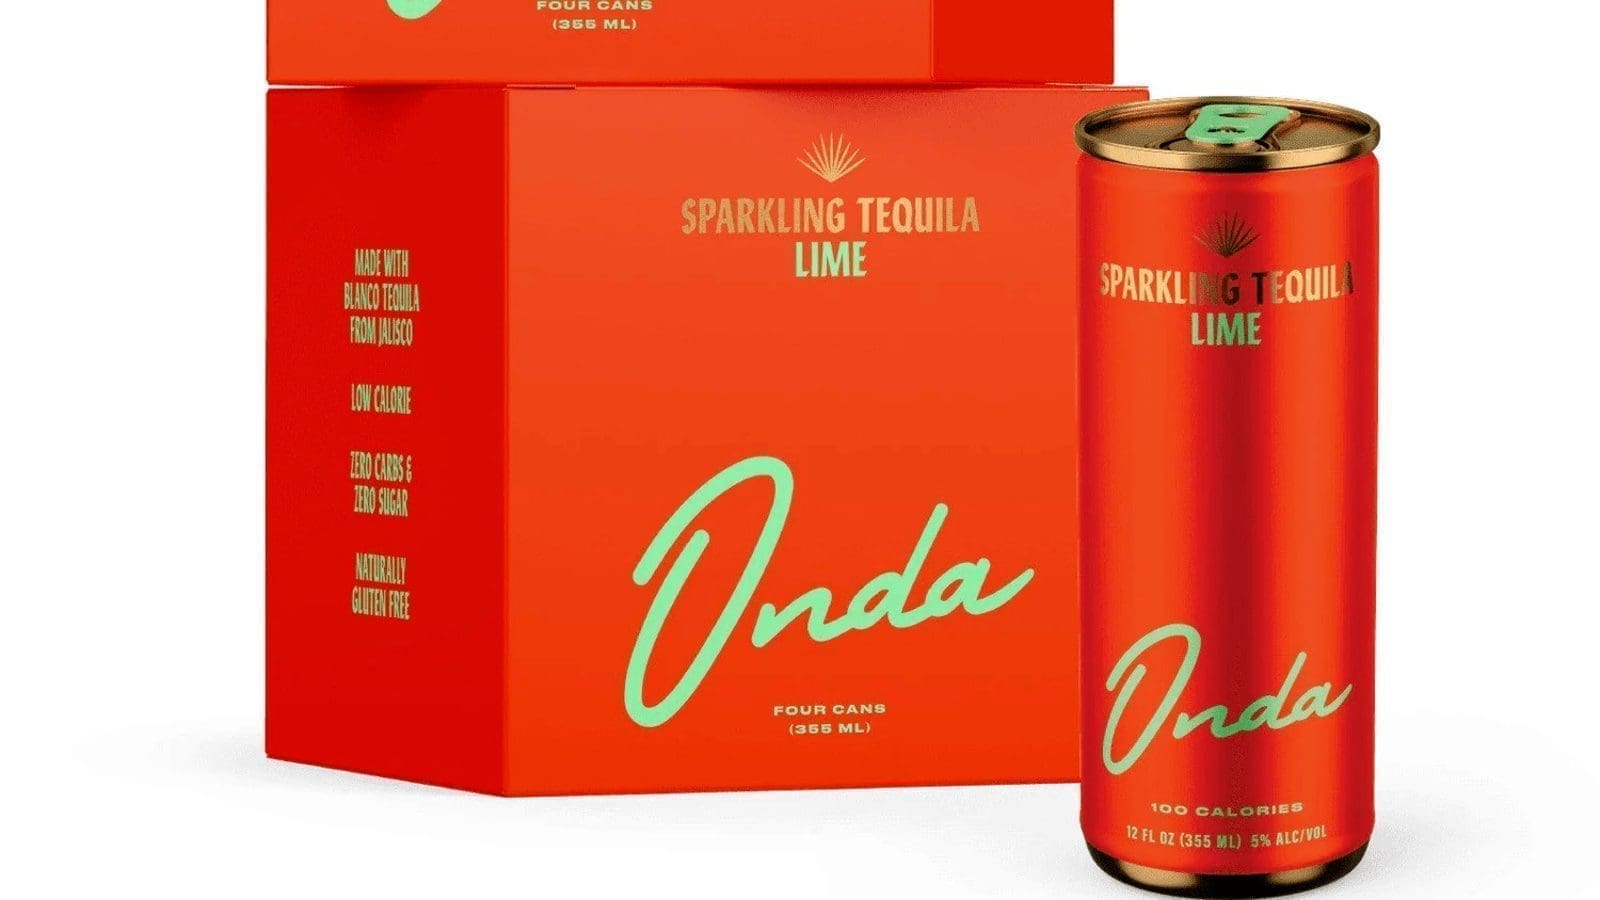 Tequila seltzer brand Onda secures US$12.5M growth investment to catalyze growth